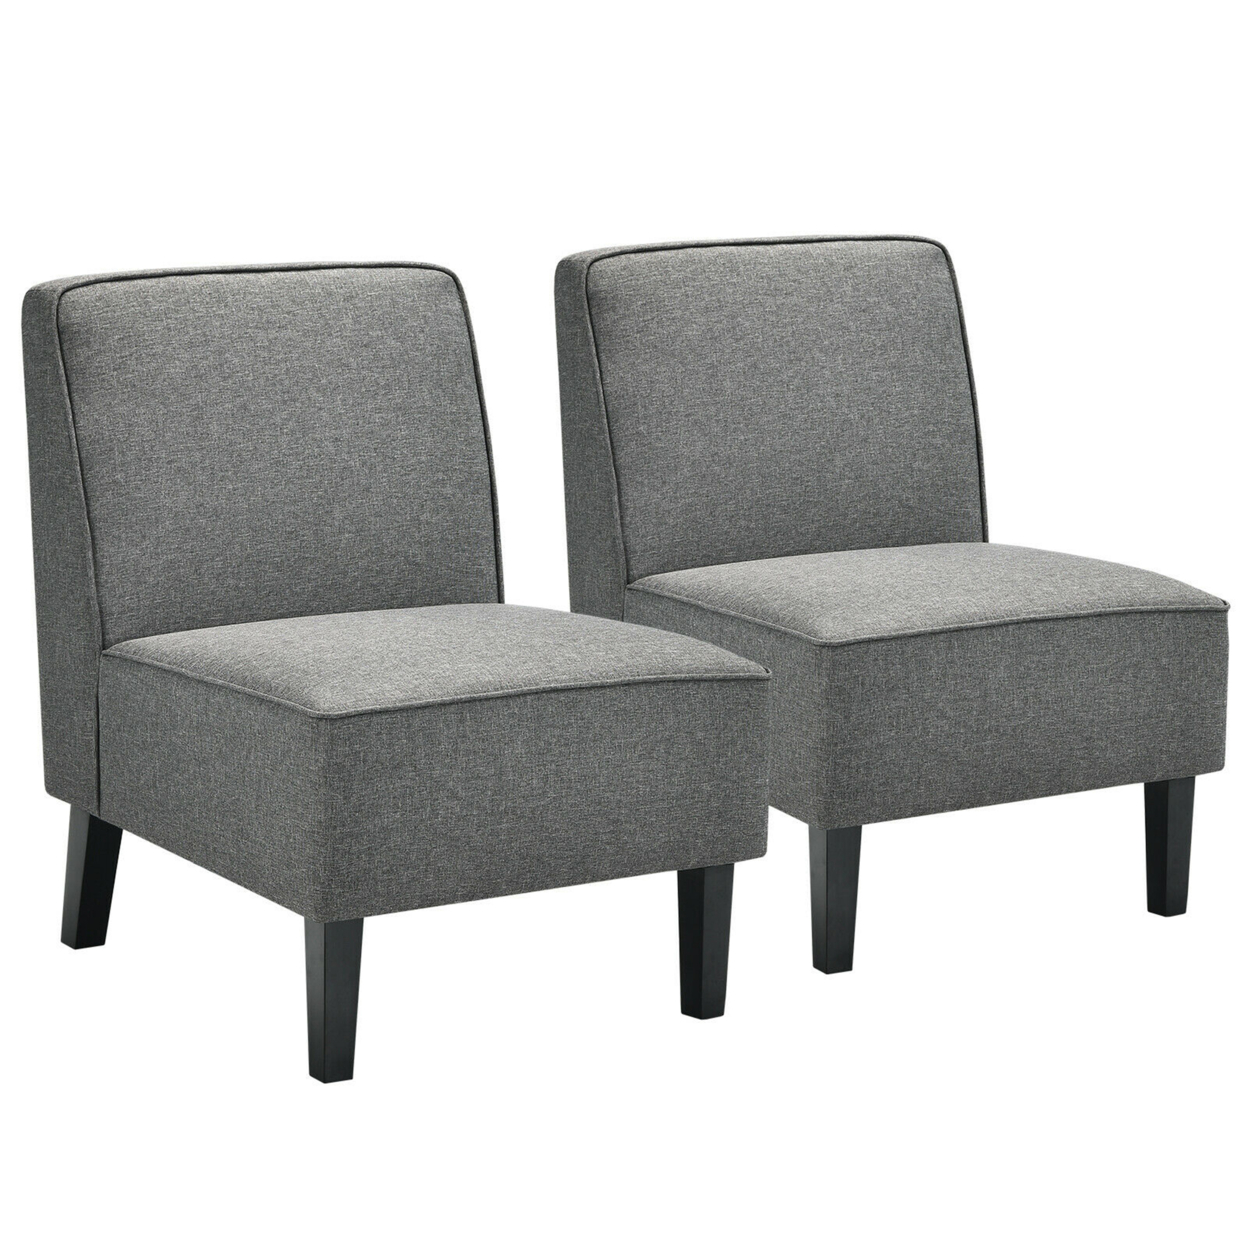 Set Of 2 Armless Accent Chair Fabric Single Sofa W/ Rubber Wood Legs Grey